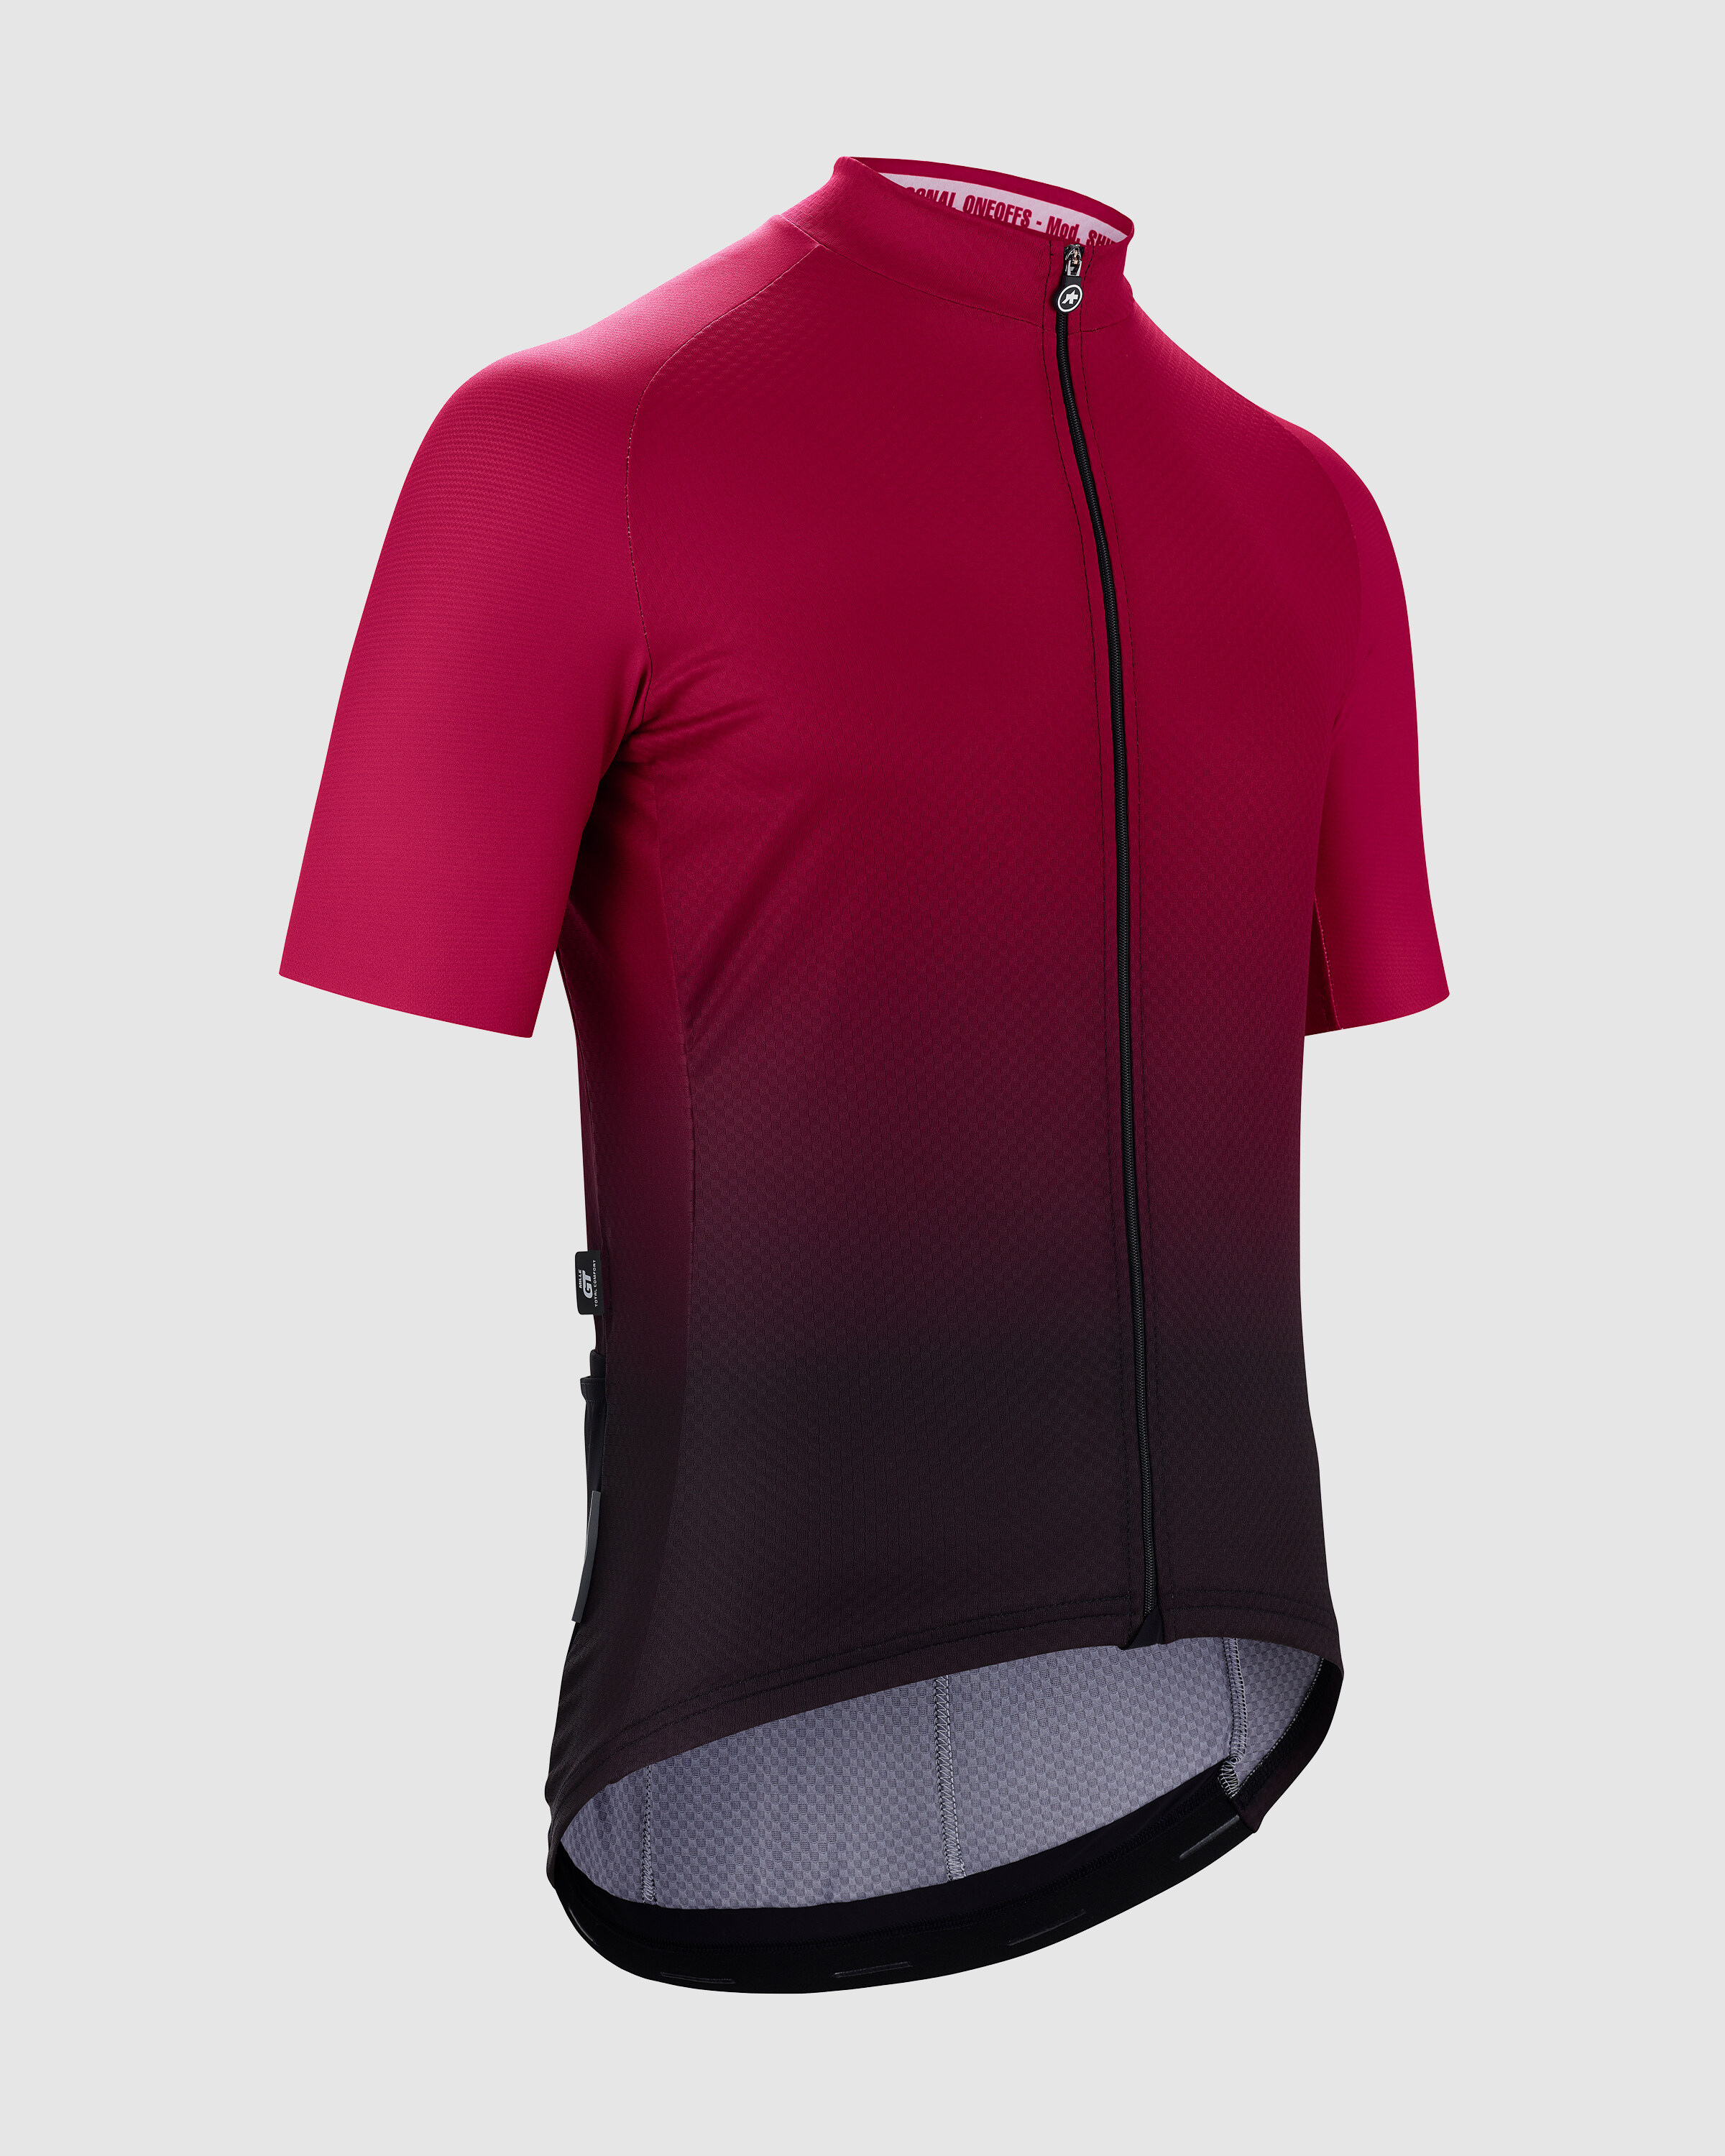 MILLE GT Jersey C2 Shifter - ASSOS Of Switzerland - Official Outlet